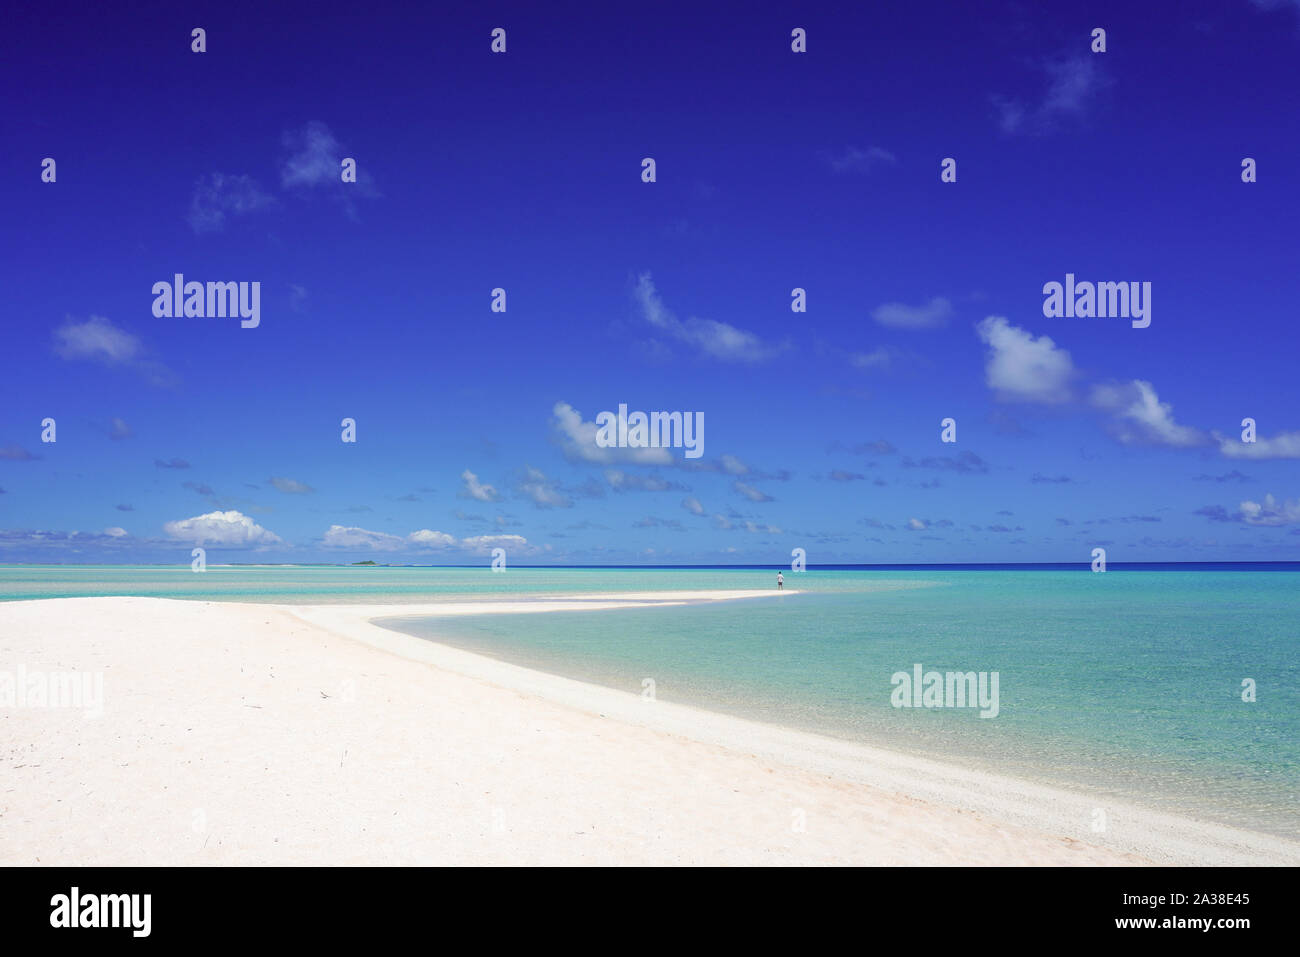 A man looks out over a tropical turquoise lagoon from a white sandy beach under a blue sky with copy space Stock Photo